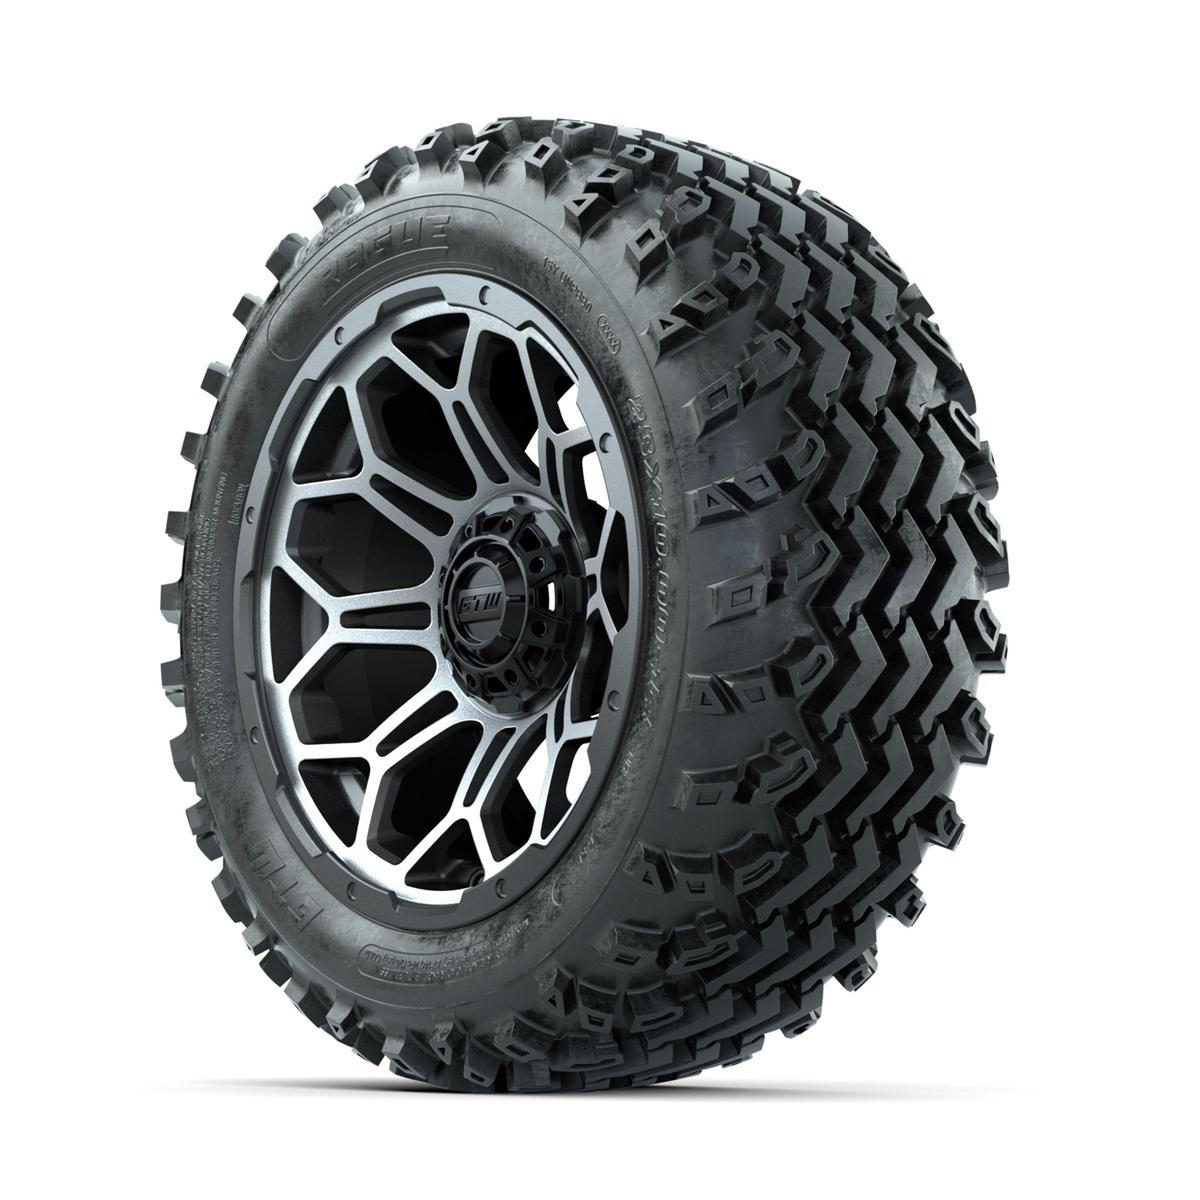 GTW Bravo Machined/Matte Grey 14 in Wheels with 23x10.00-14 Rogue All Terrain Tires – Full Set